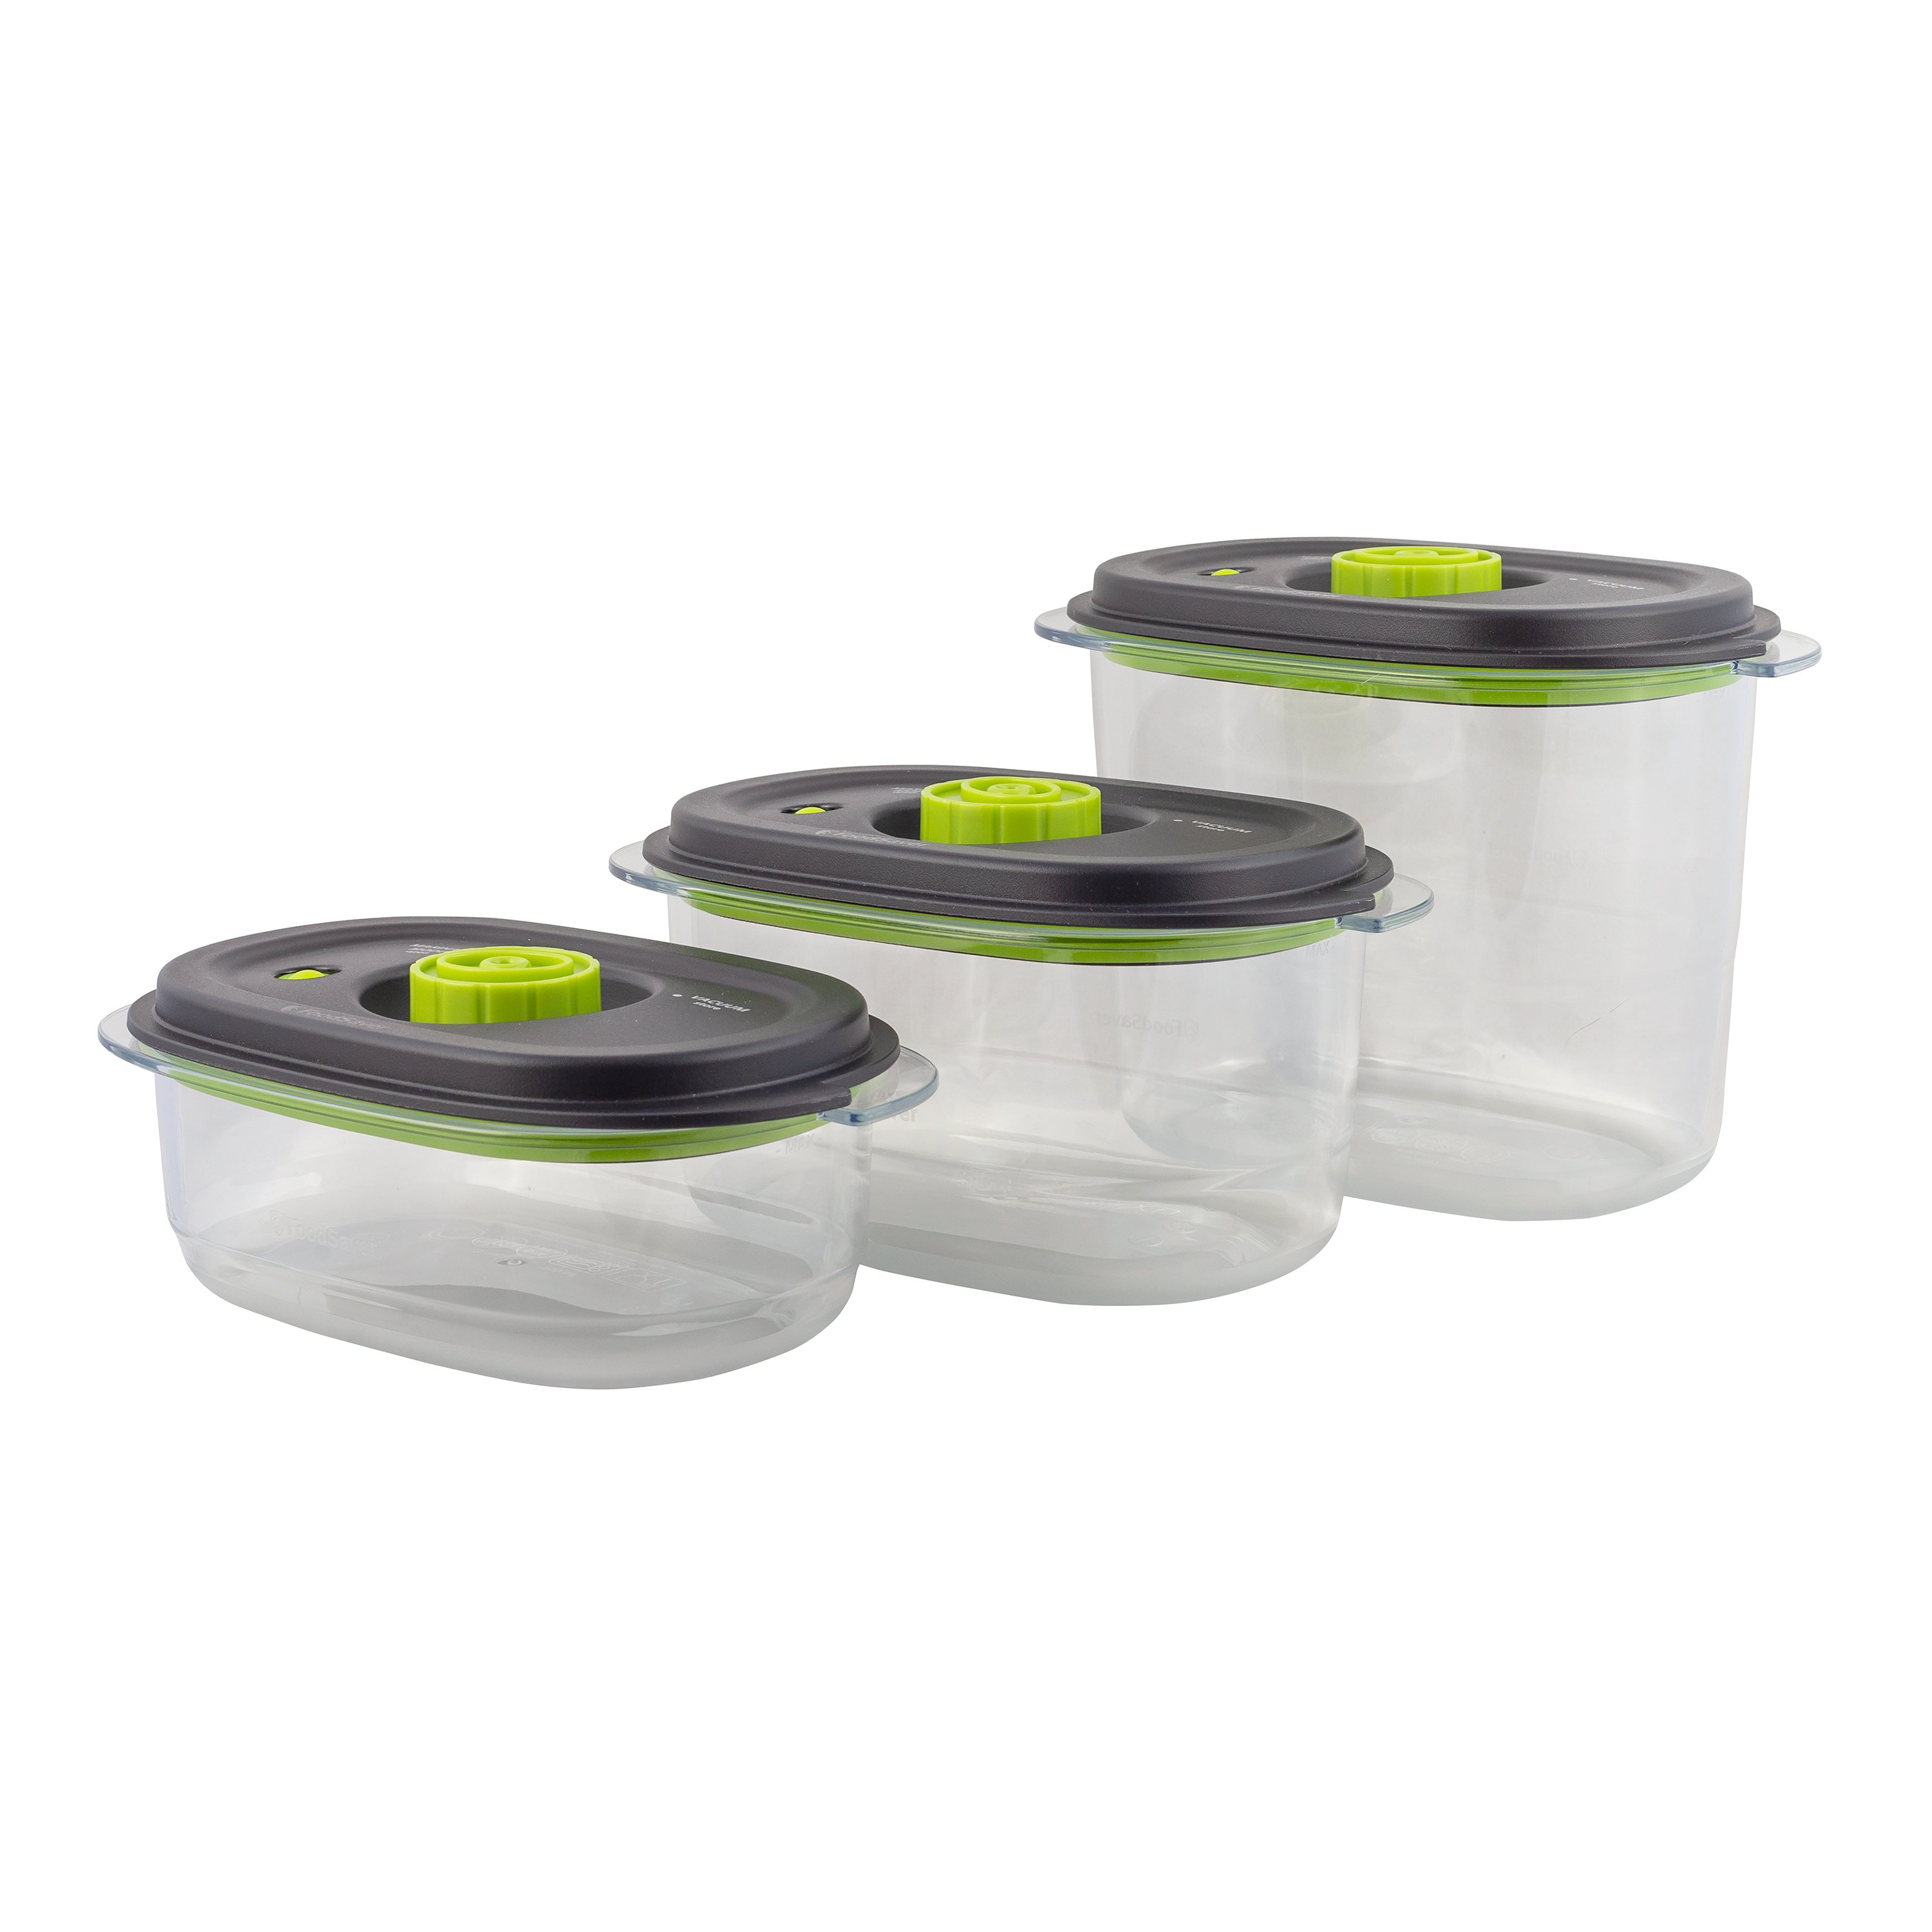 https://newellbrands.scene7.com/is/image//NewellRubbermaid/2116367-FoodSaver-Containers-prodcut%20silo